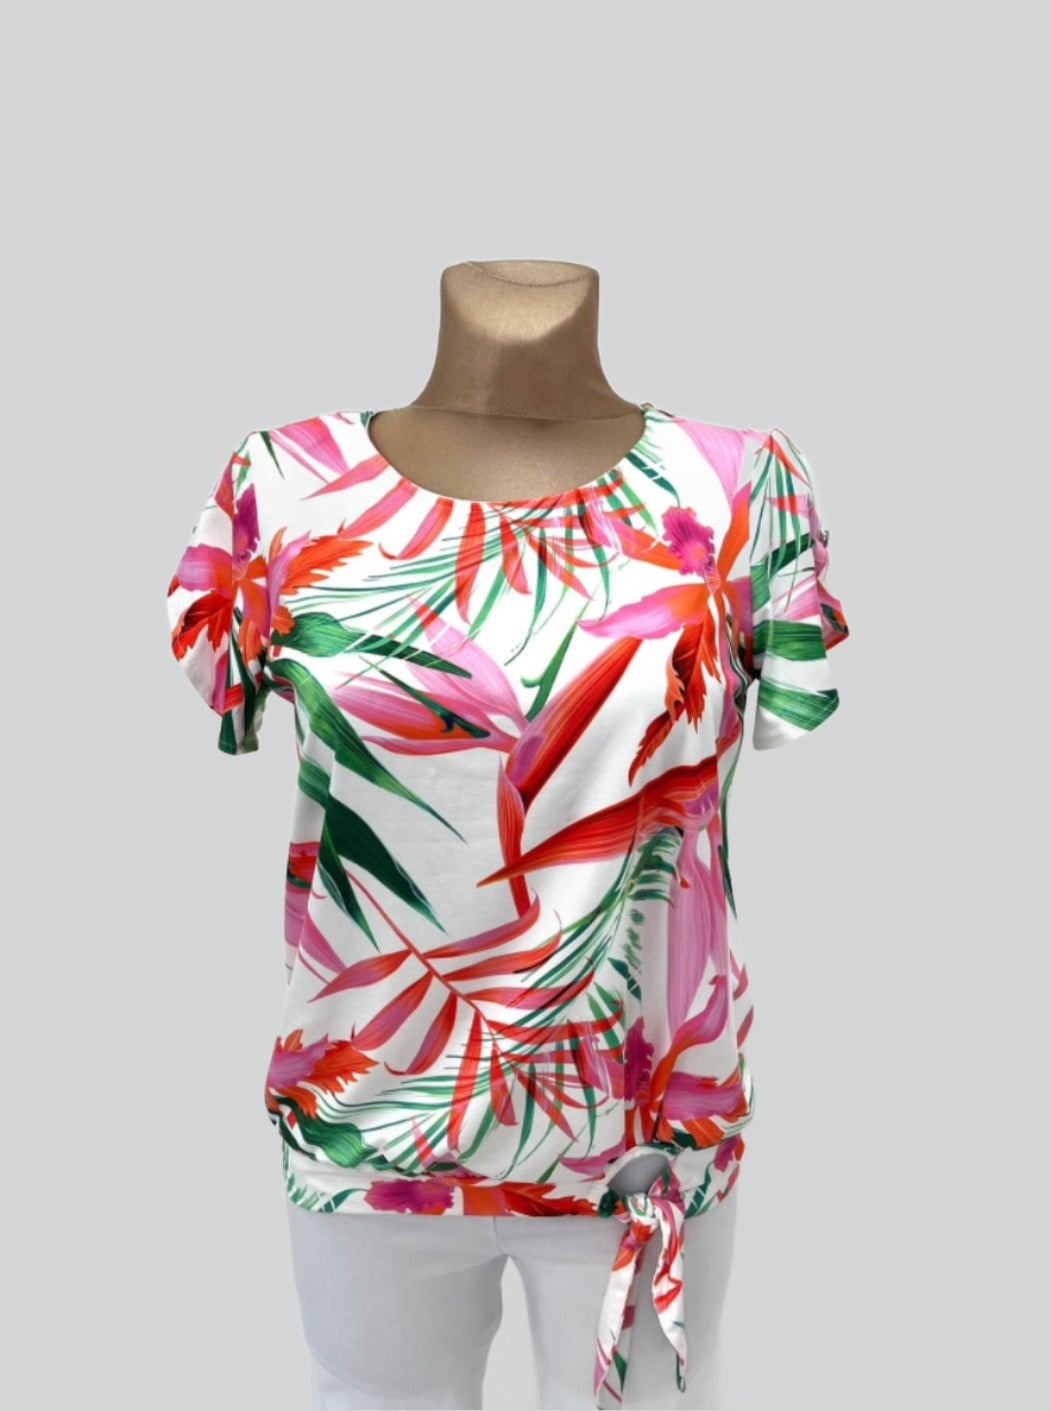 Yew Round neck short sleeve top with tie detail. Pink mix